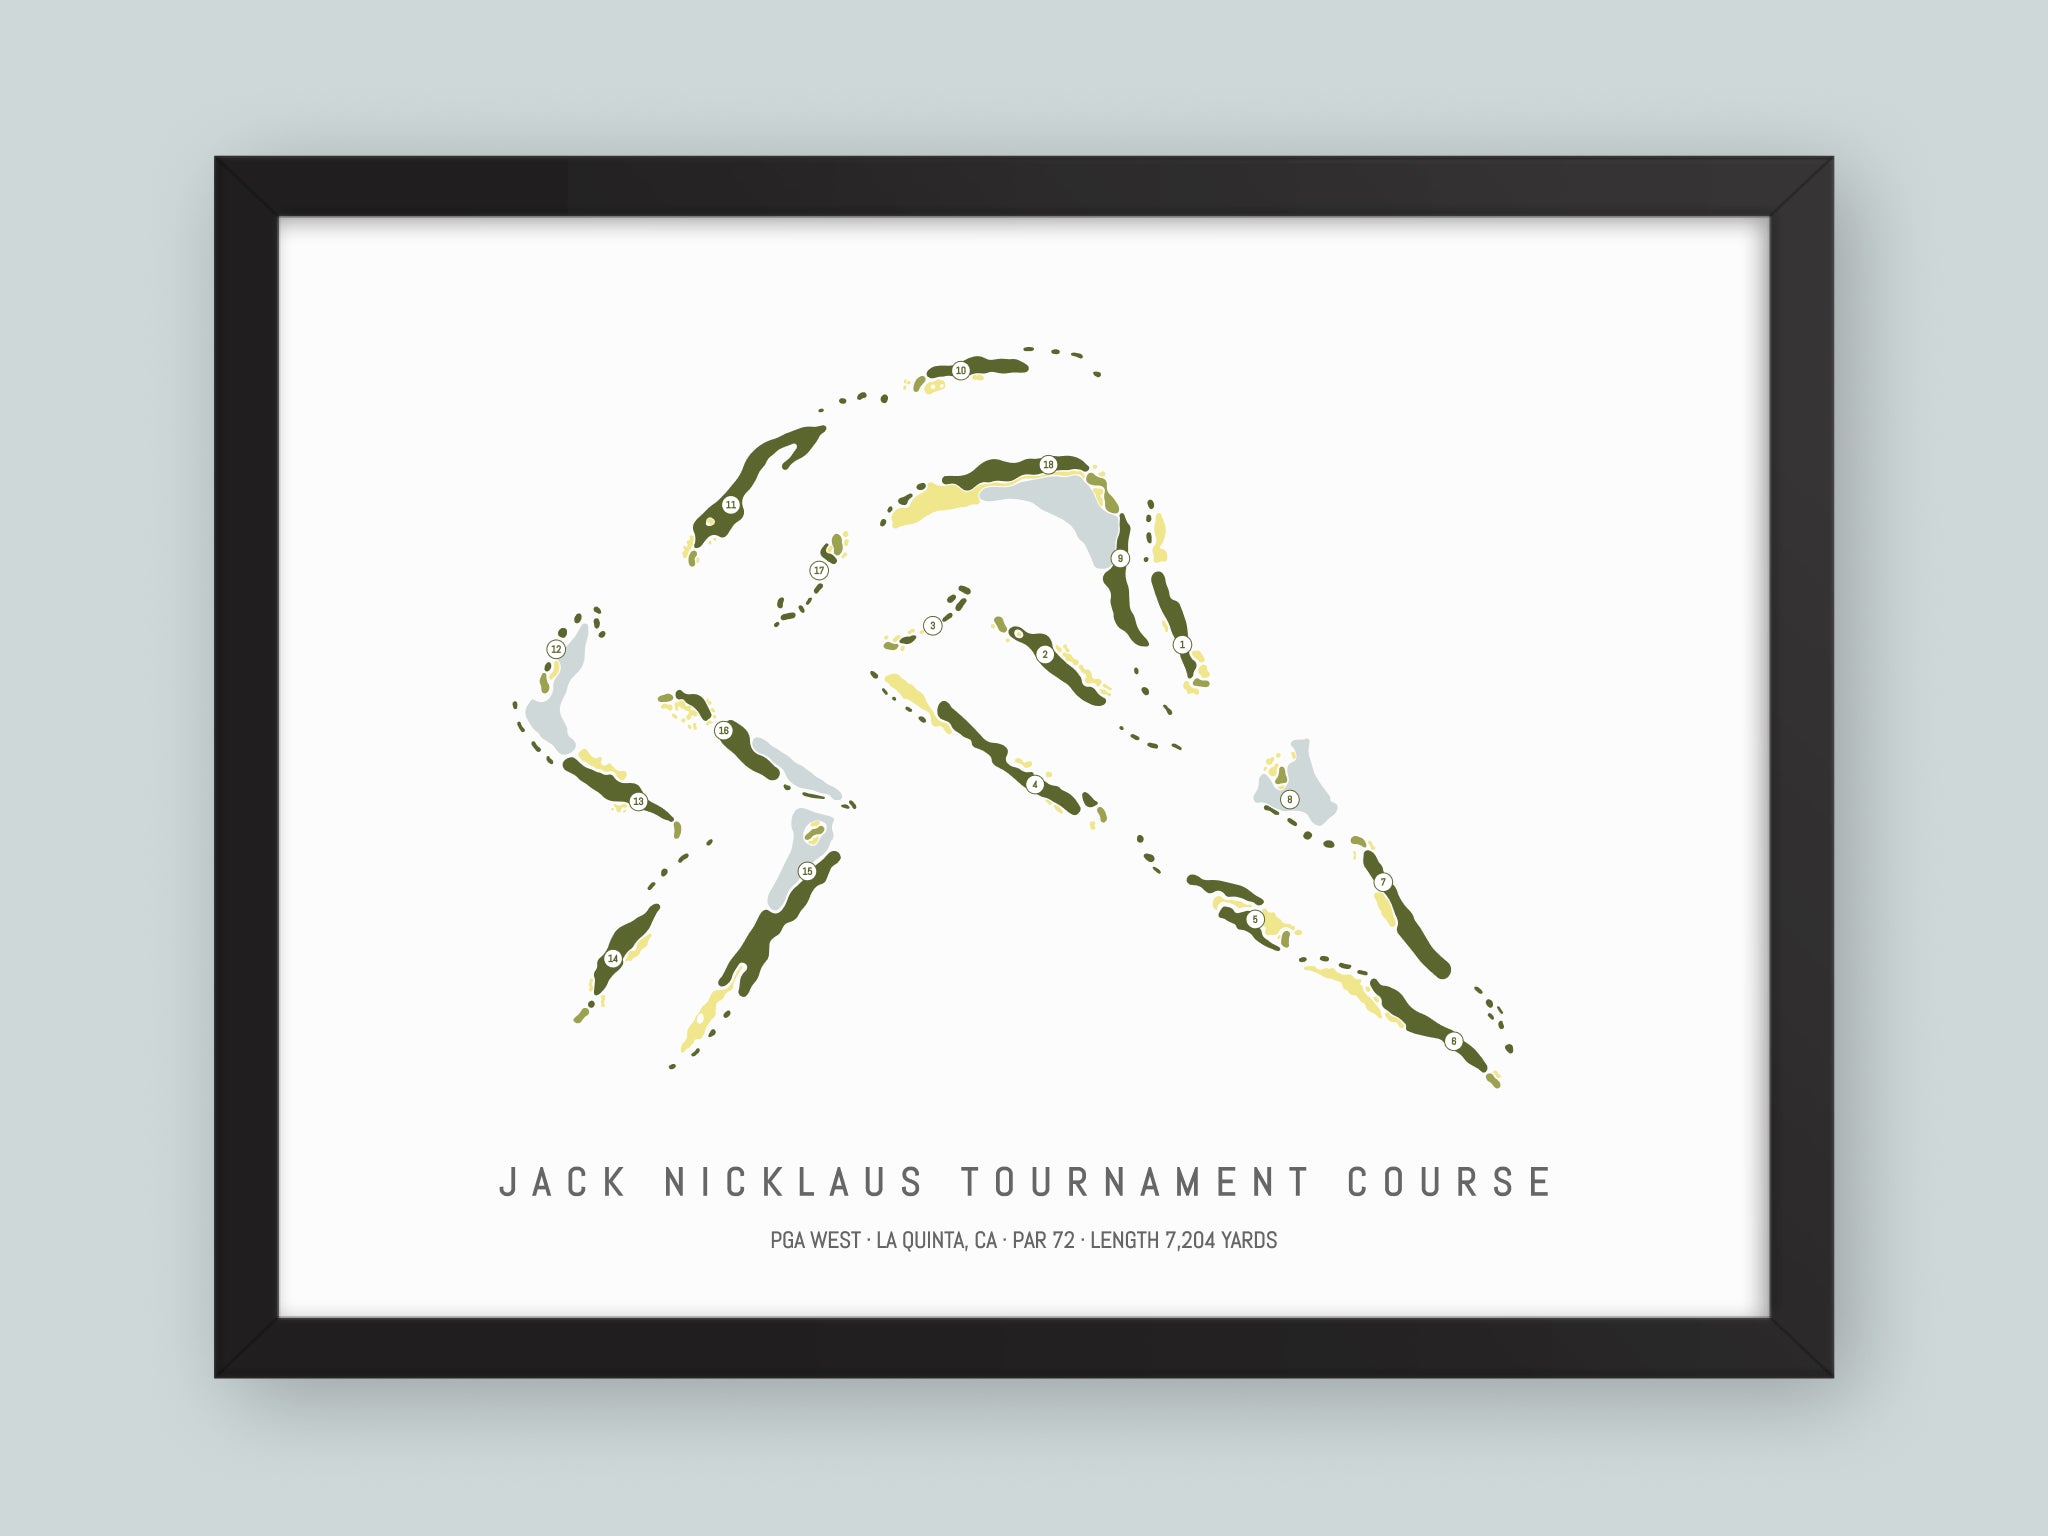 PGA-West-Jack-Nicklaus-Tournament-Course-CA--Black-Frame-24x18-With-Hole-Numbers